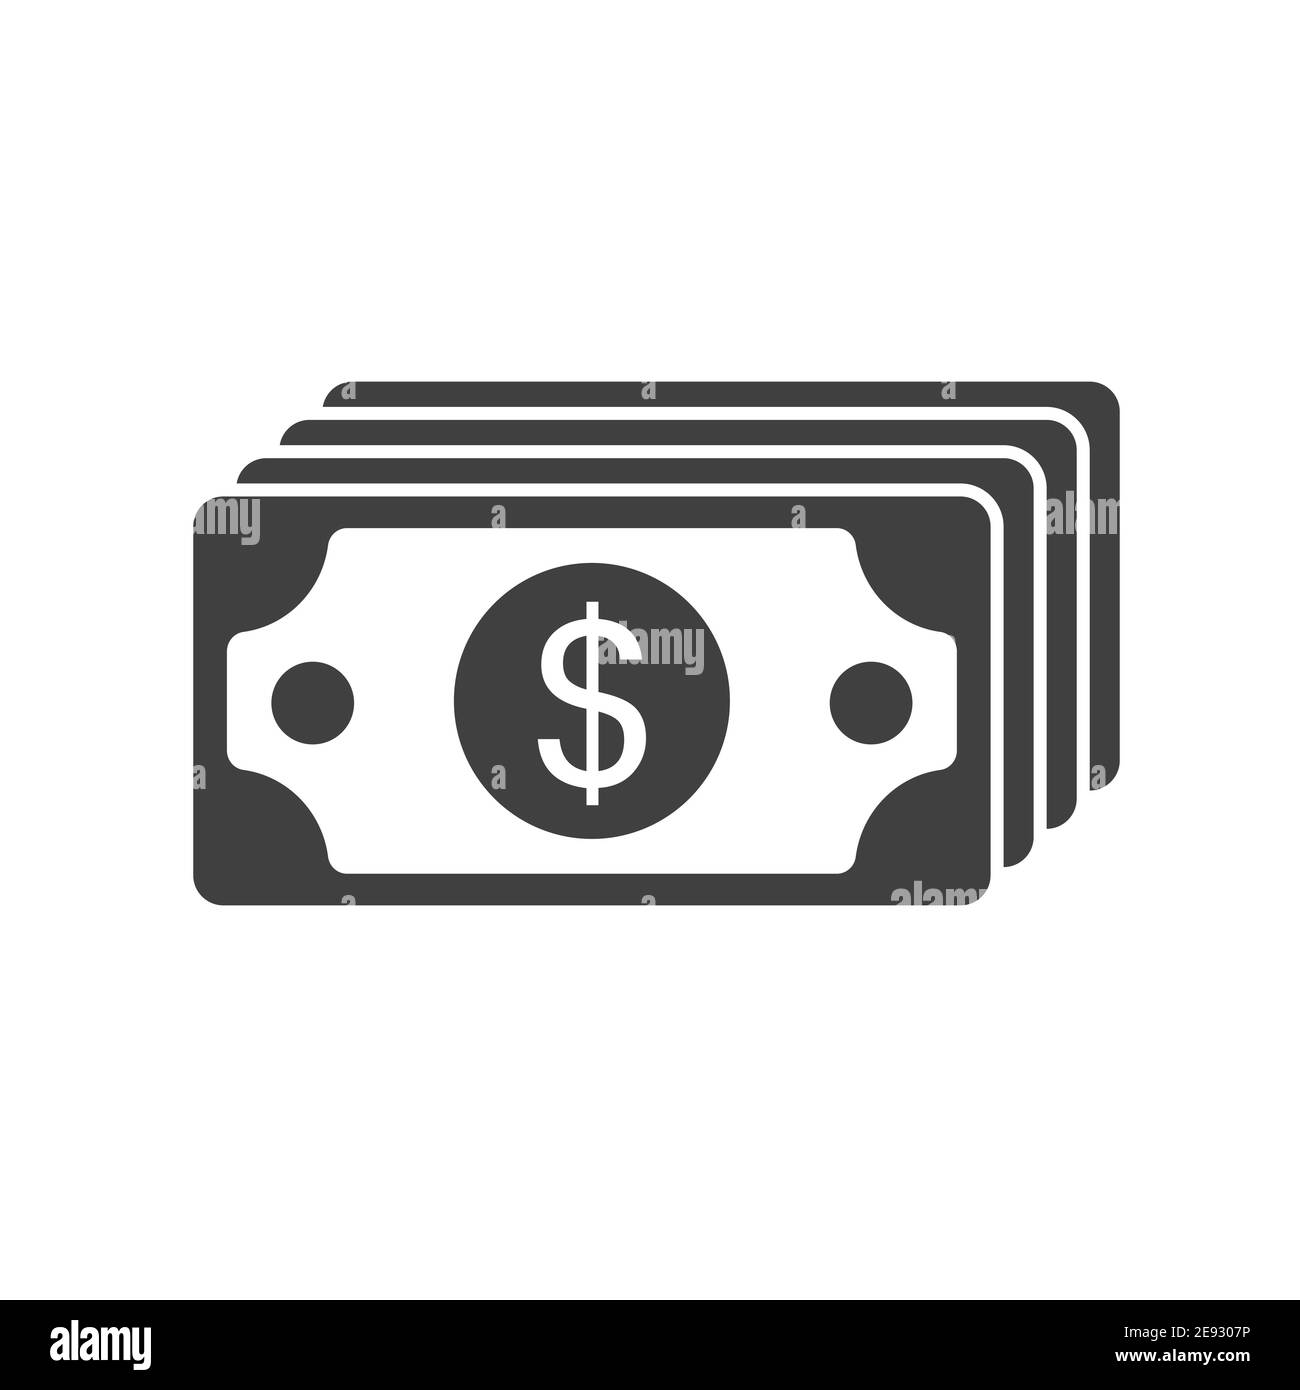 Dollar cash icon set. Currency symbol. Black money silhouette collection in flat style. Vector illustration isolated on white background. Stock Vector